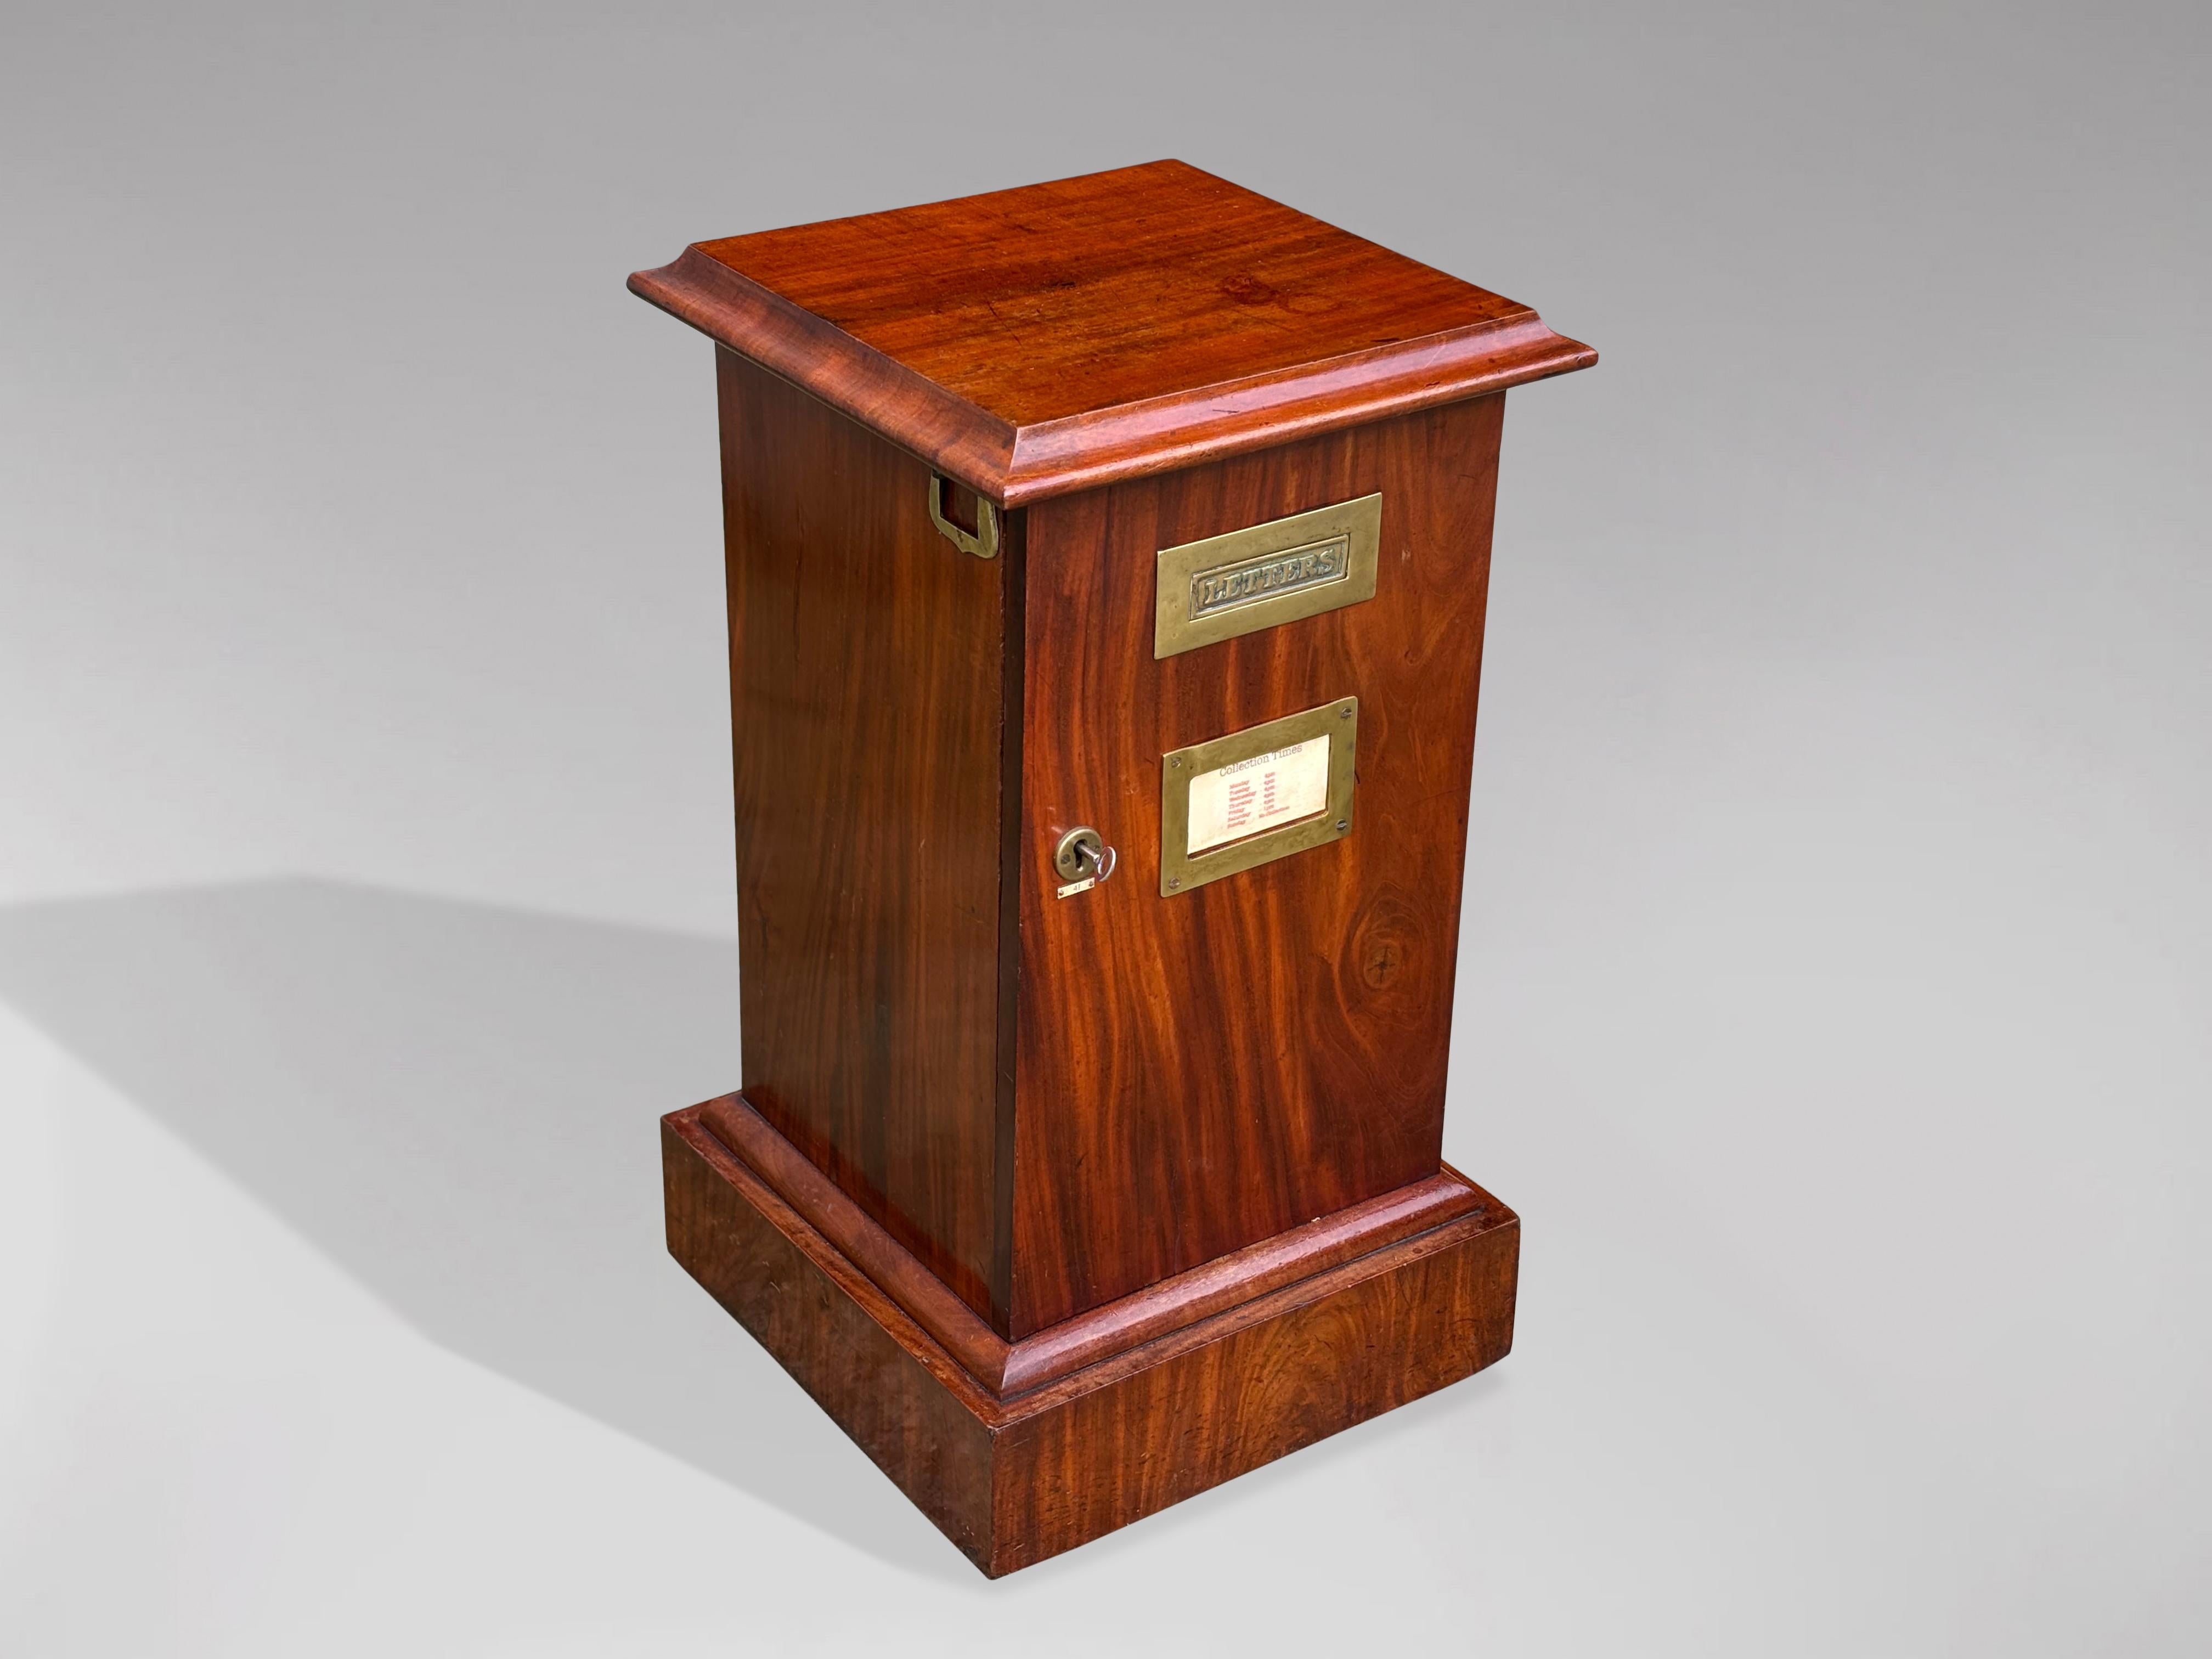 A tall attractive late 19th Century Victorian period figured mahogany country house post box or letter box. A moulded top above a hinged door with a brass plate engraved 'Letters' and a shuttered posting slot, the door with working lock and key,